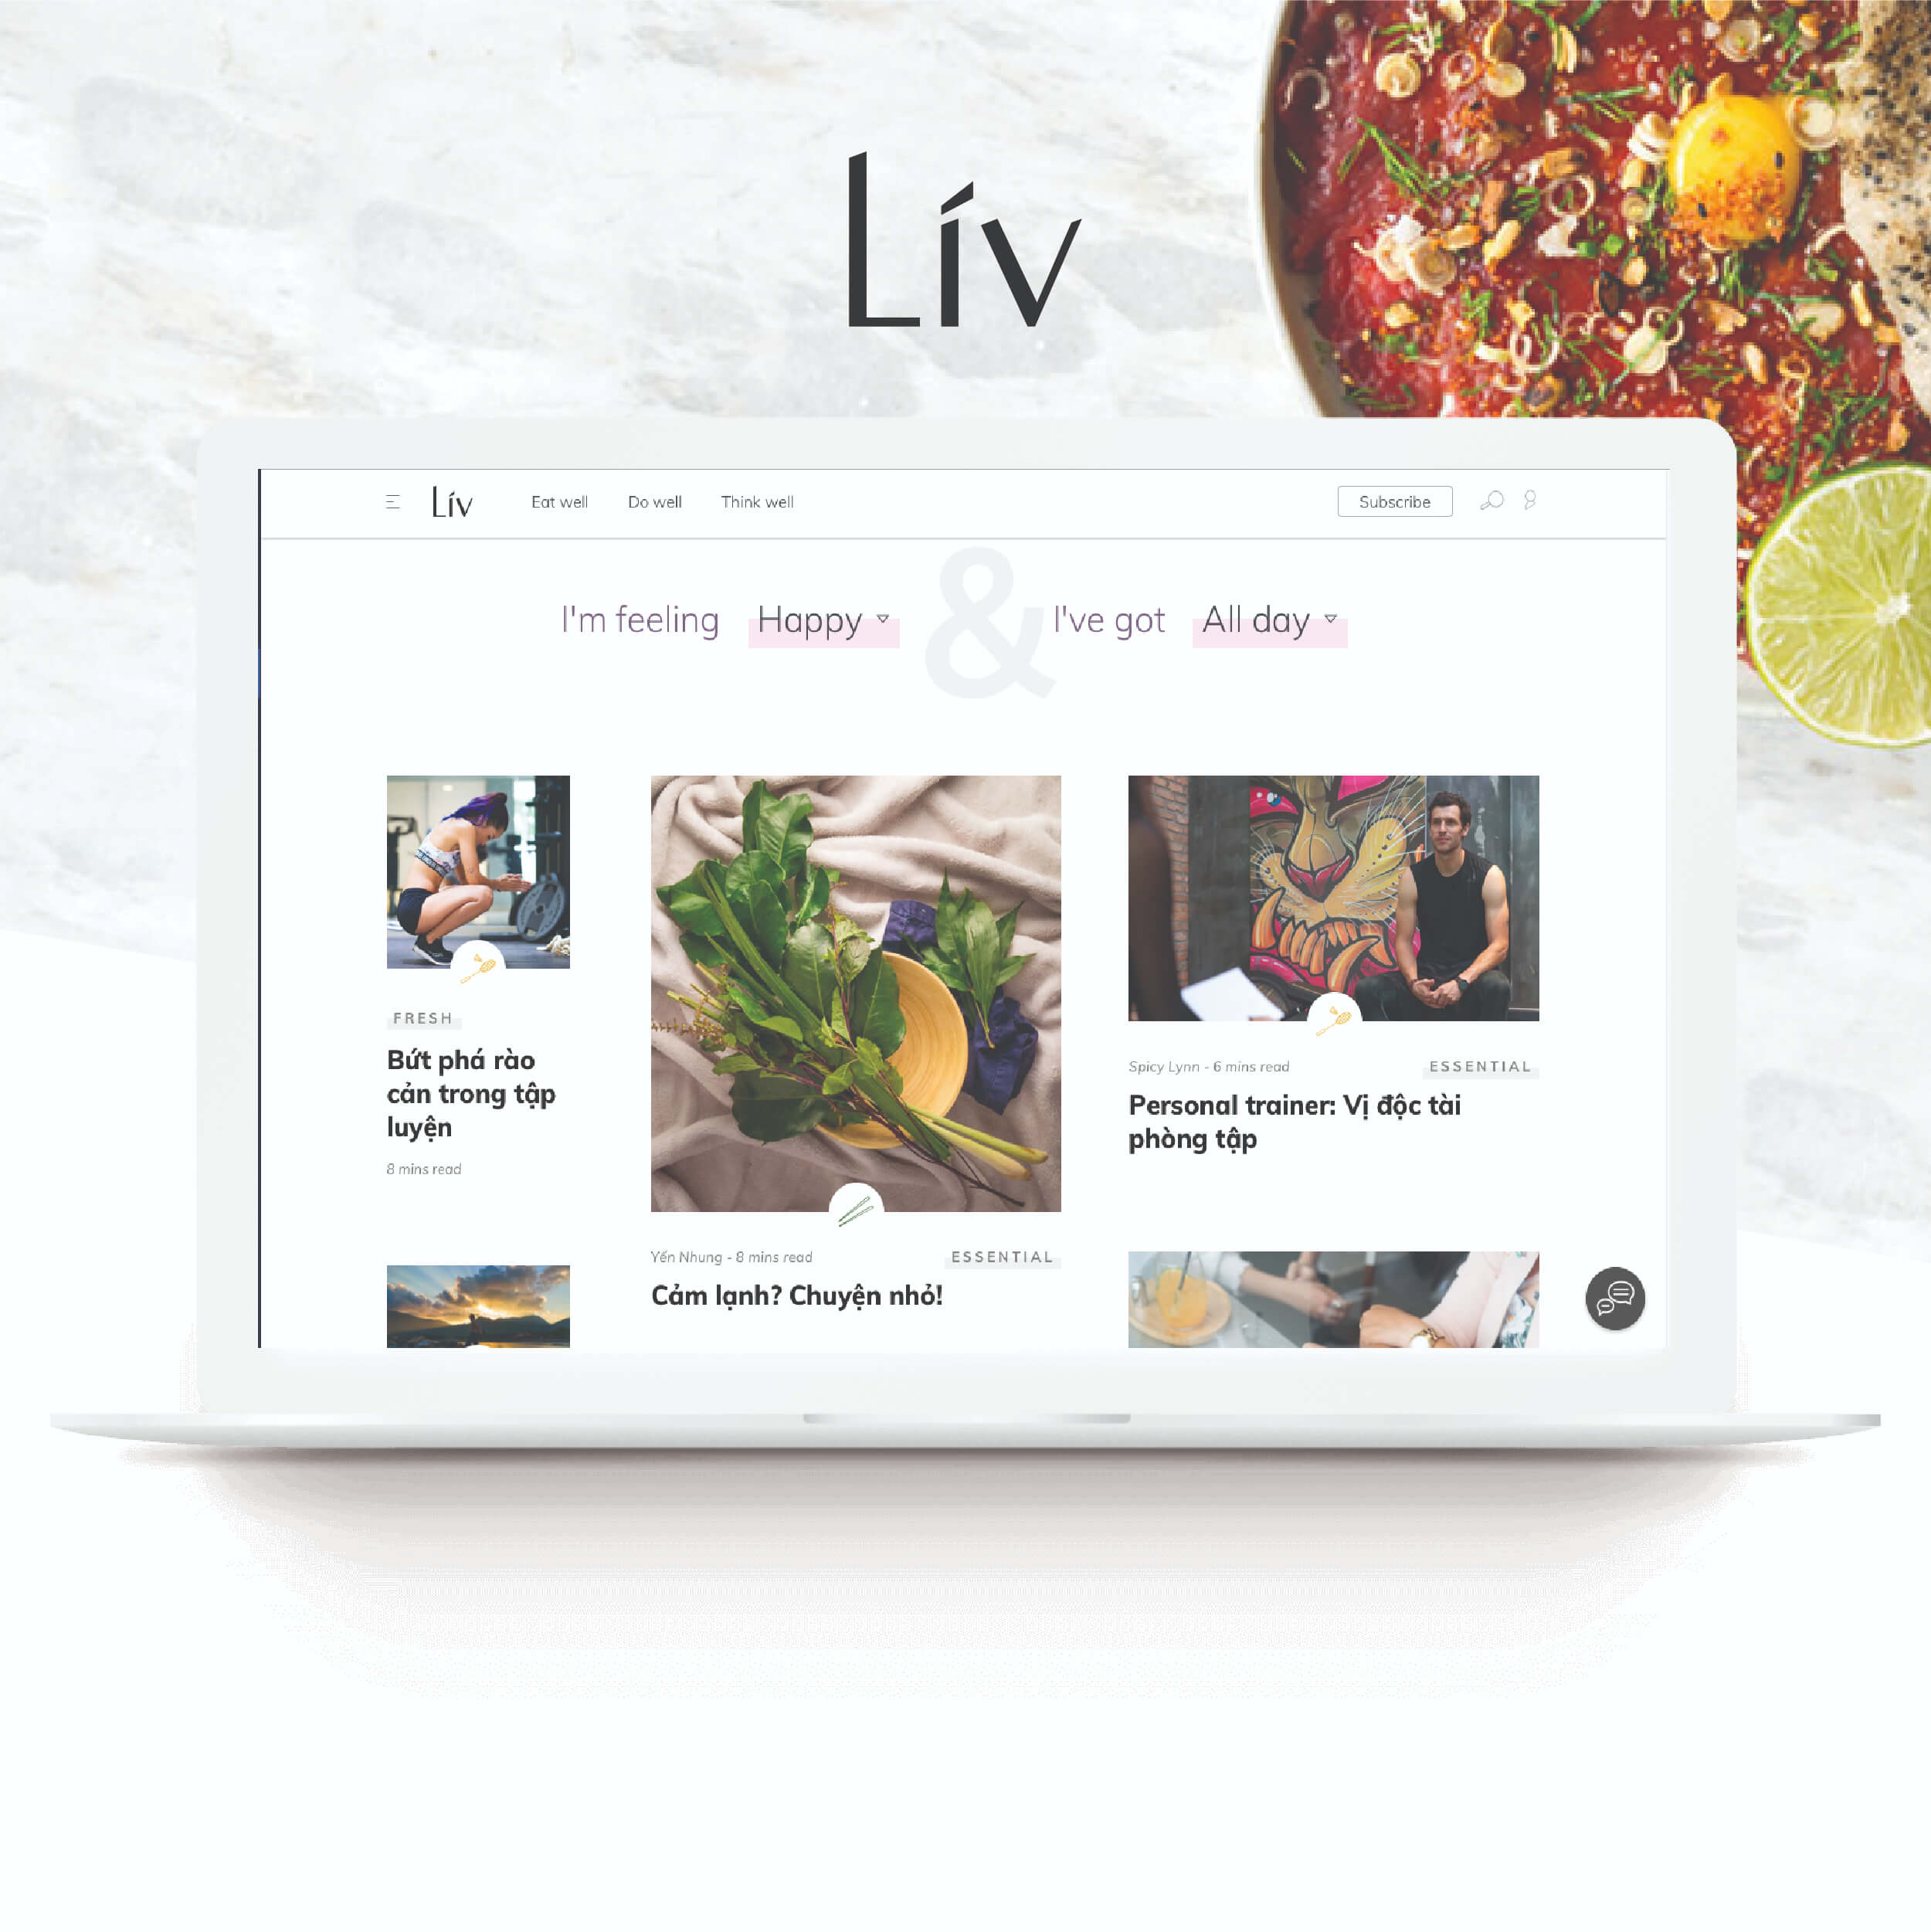 Liv by AIA - Website